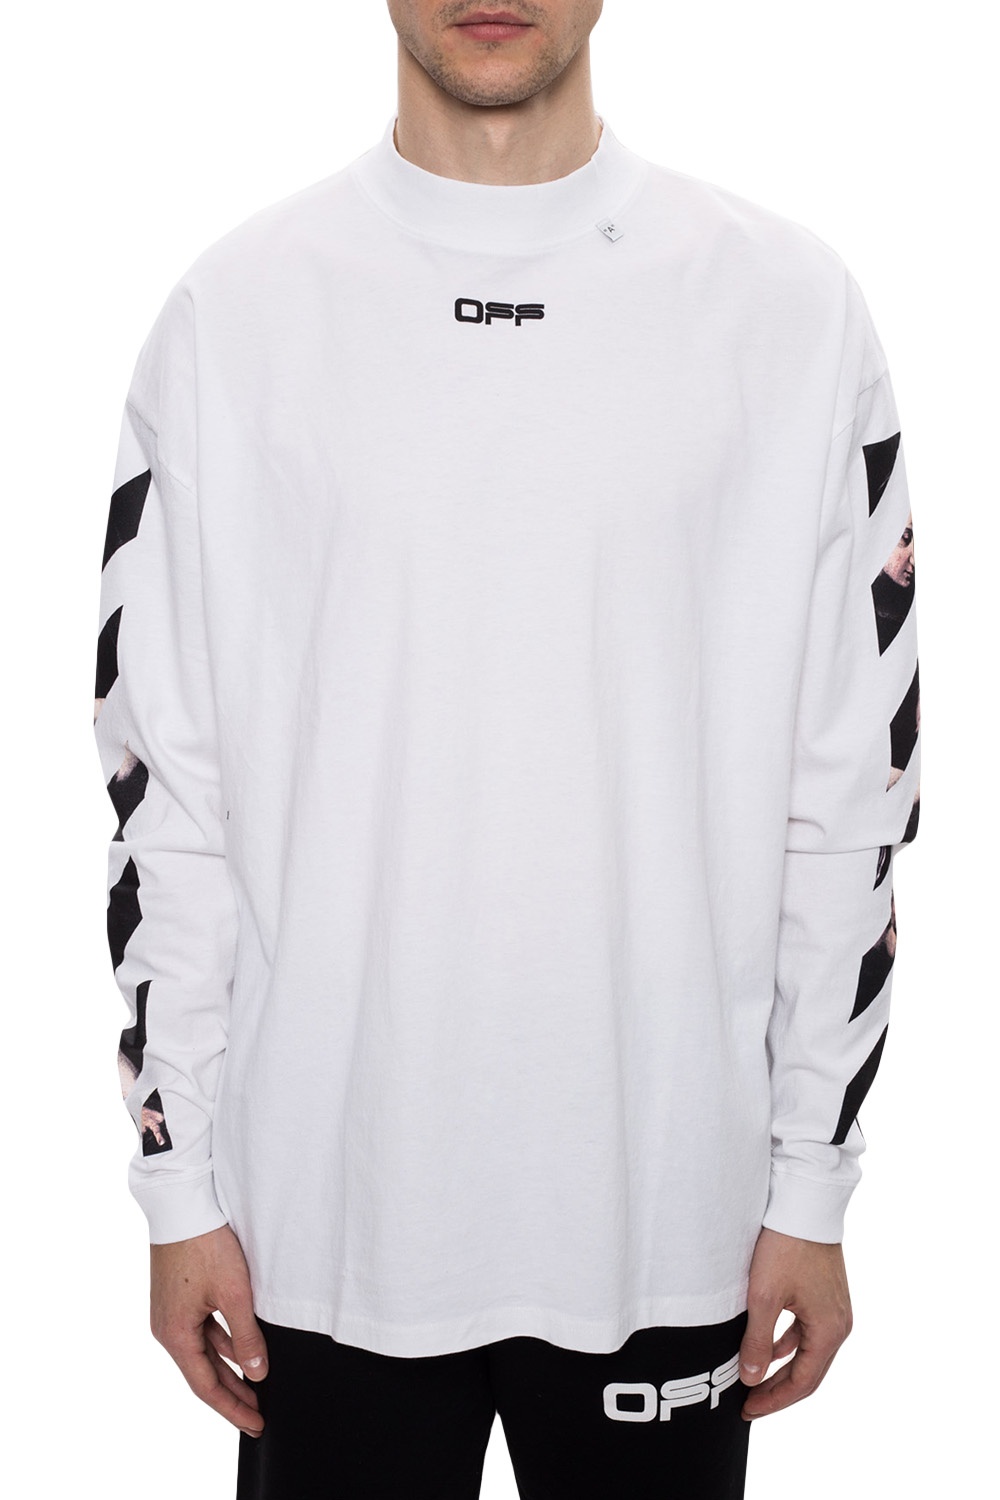 Off White Long Sleeve Outlet, 50% OFF | www.ingeniovirtual.com